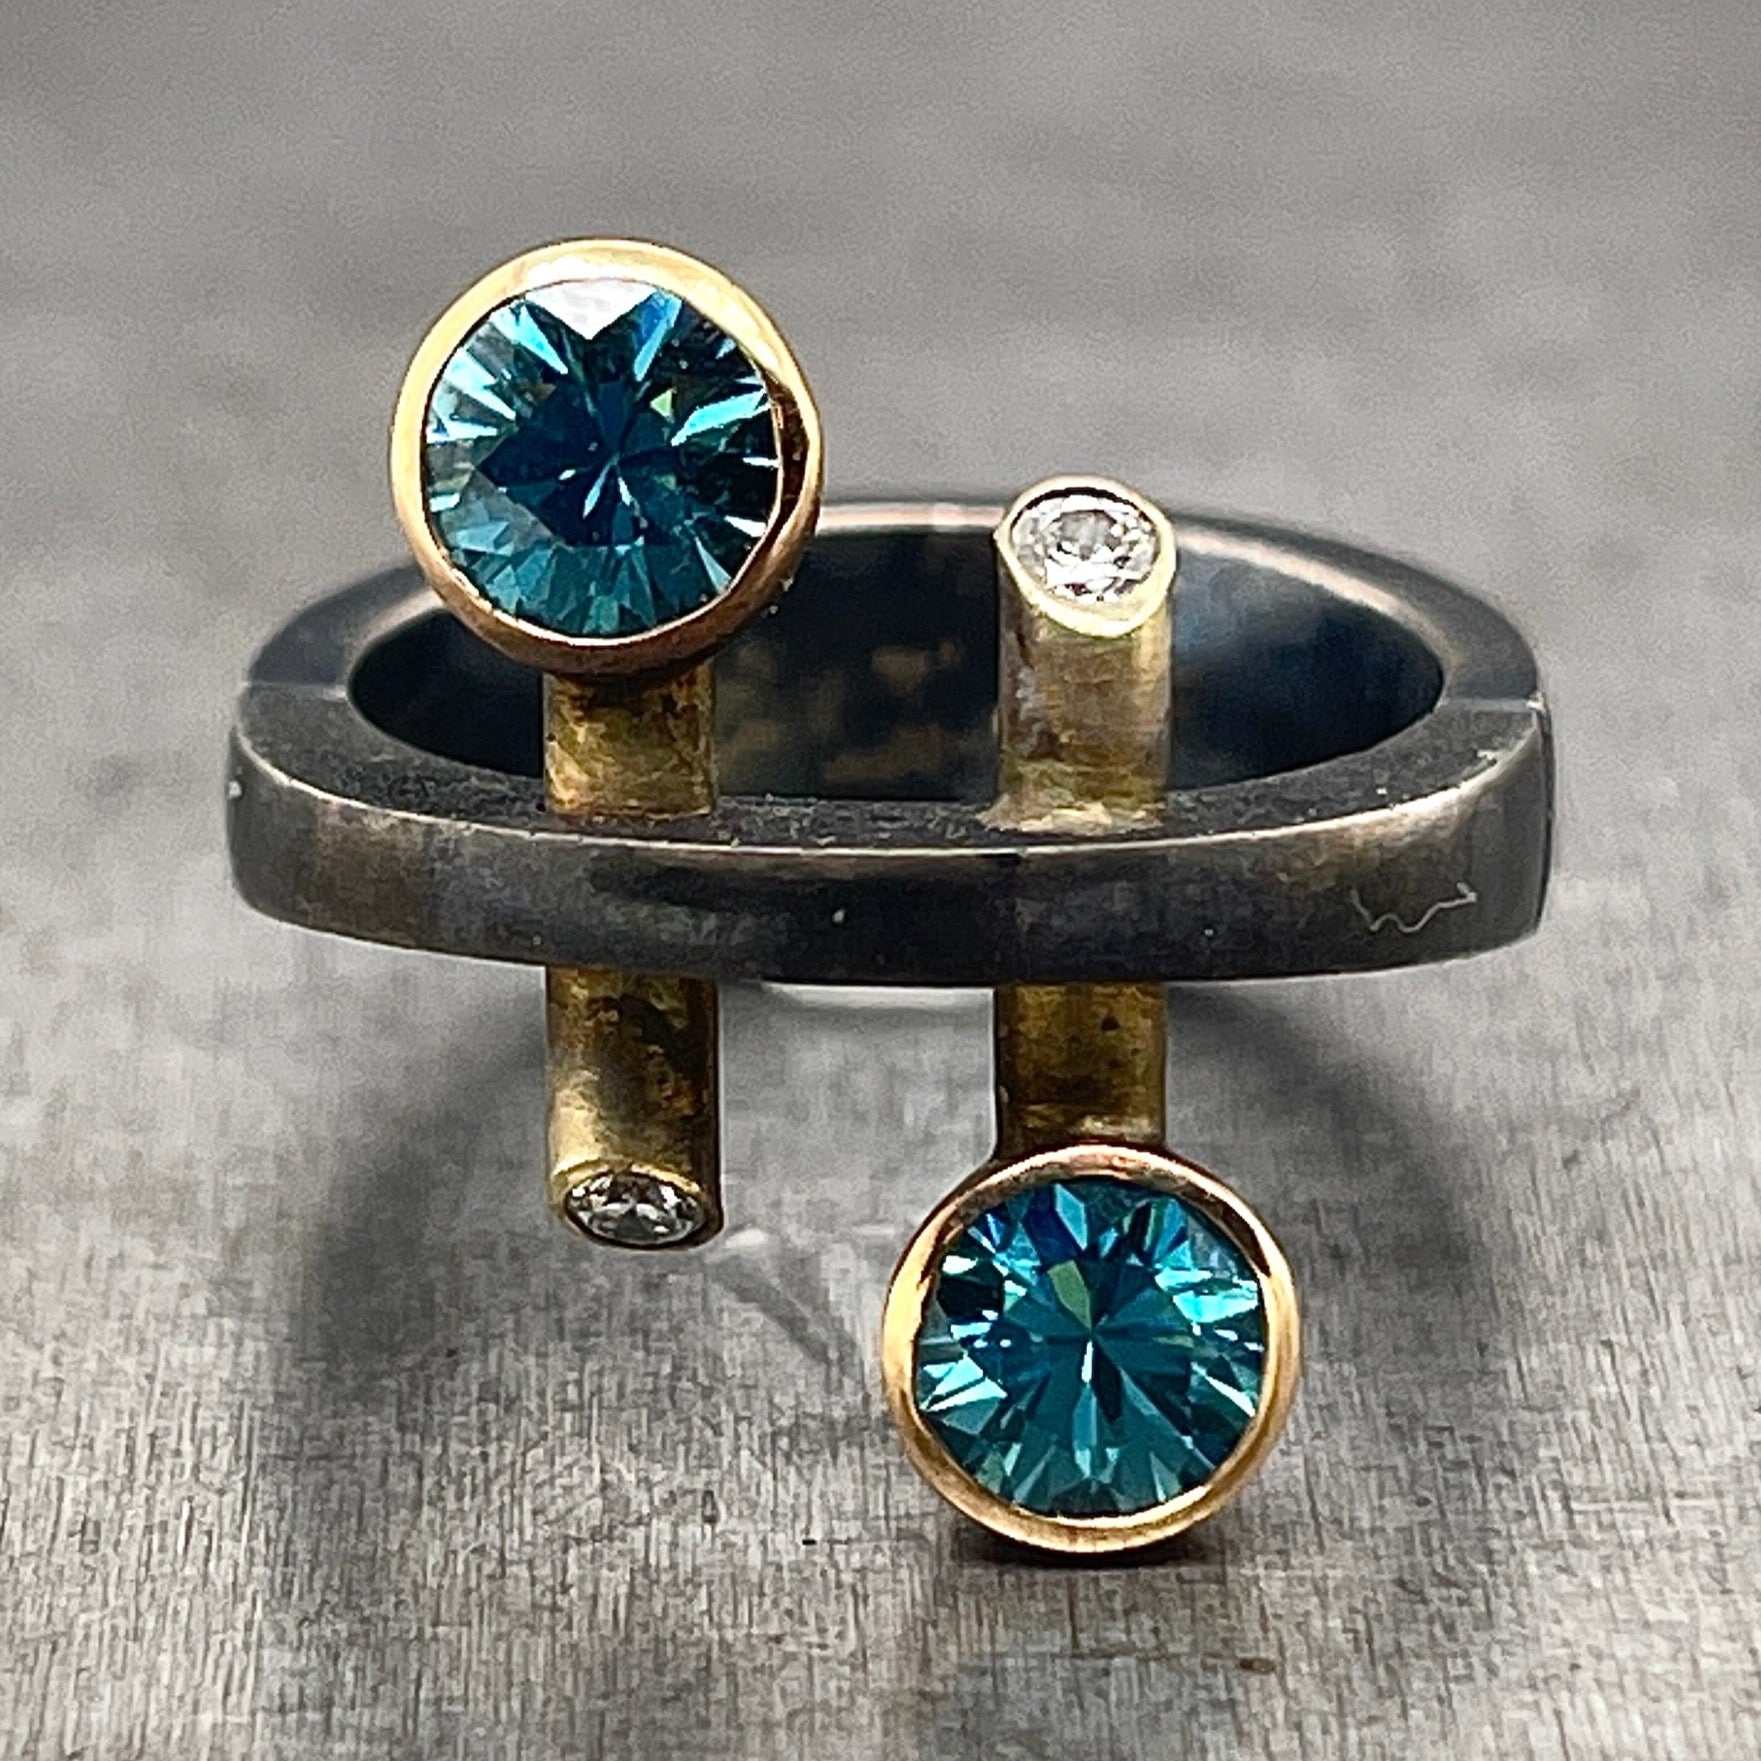 Blue Zircon and Diamond, Oxidized Sterling Silver and gold ring. This image is a front view of the top of the ring, showcasing the blue zircons.